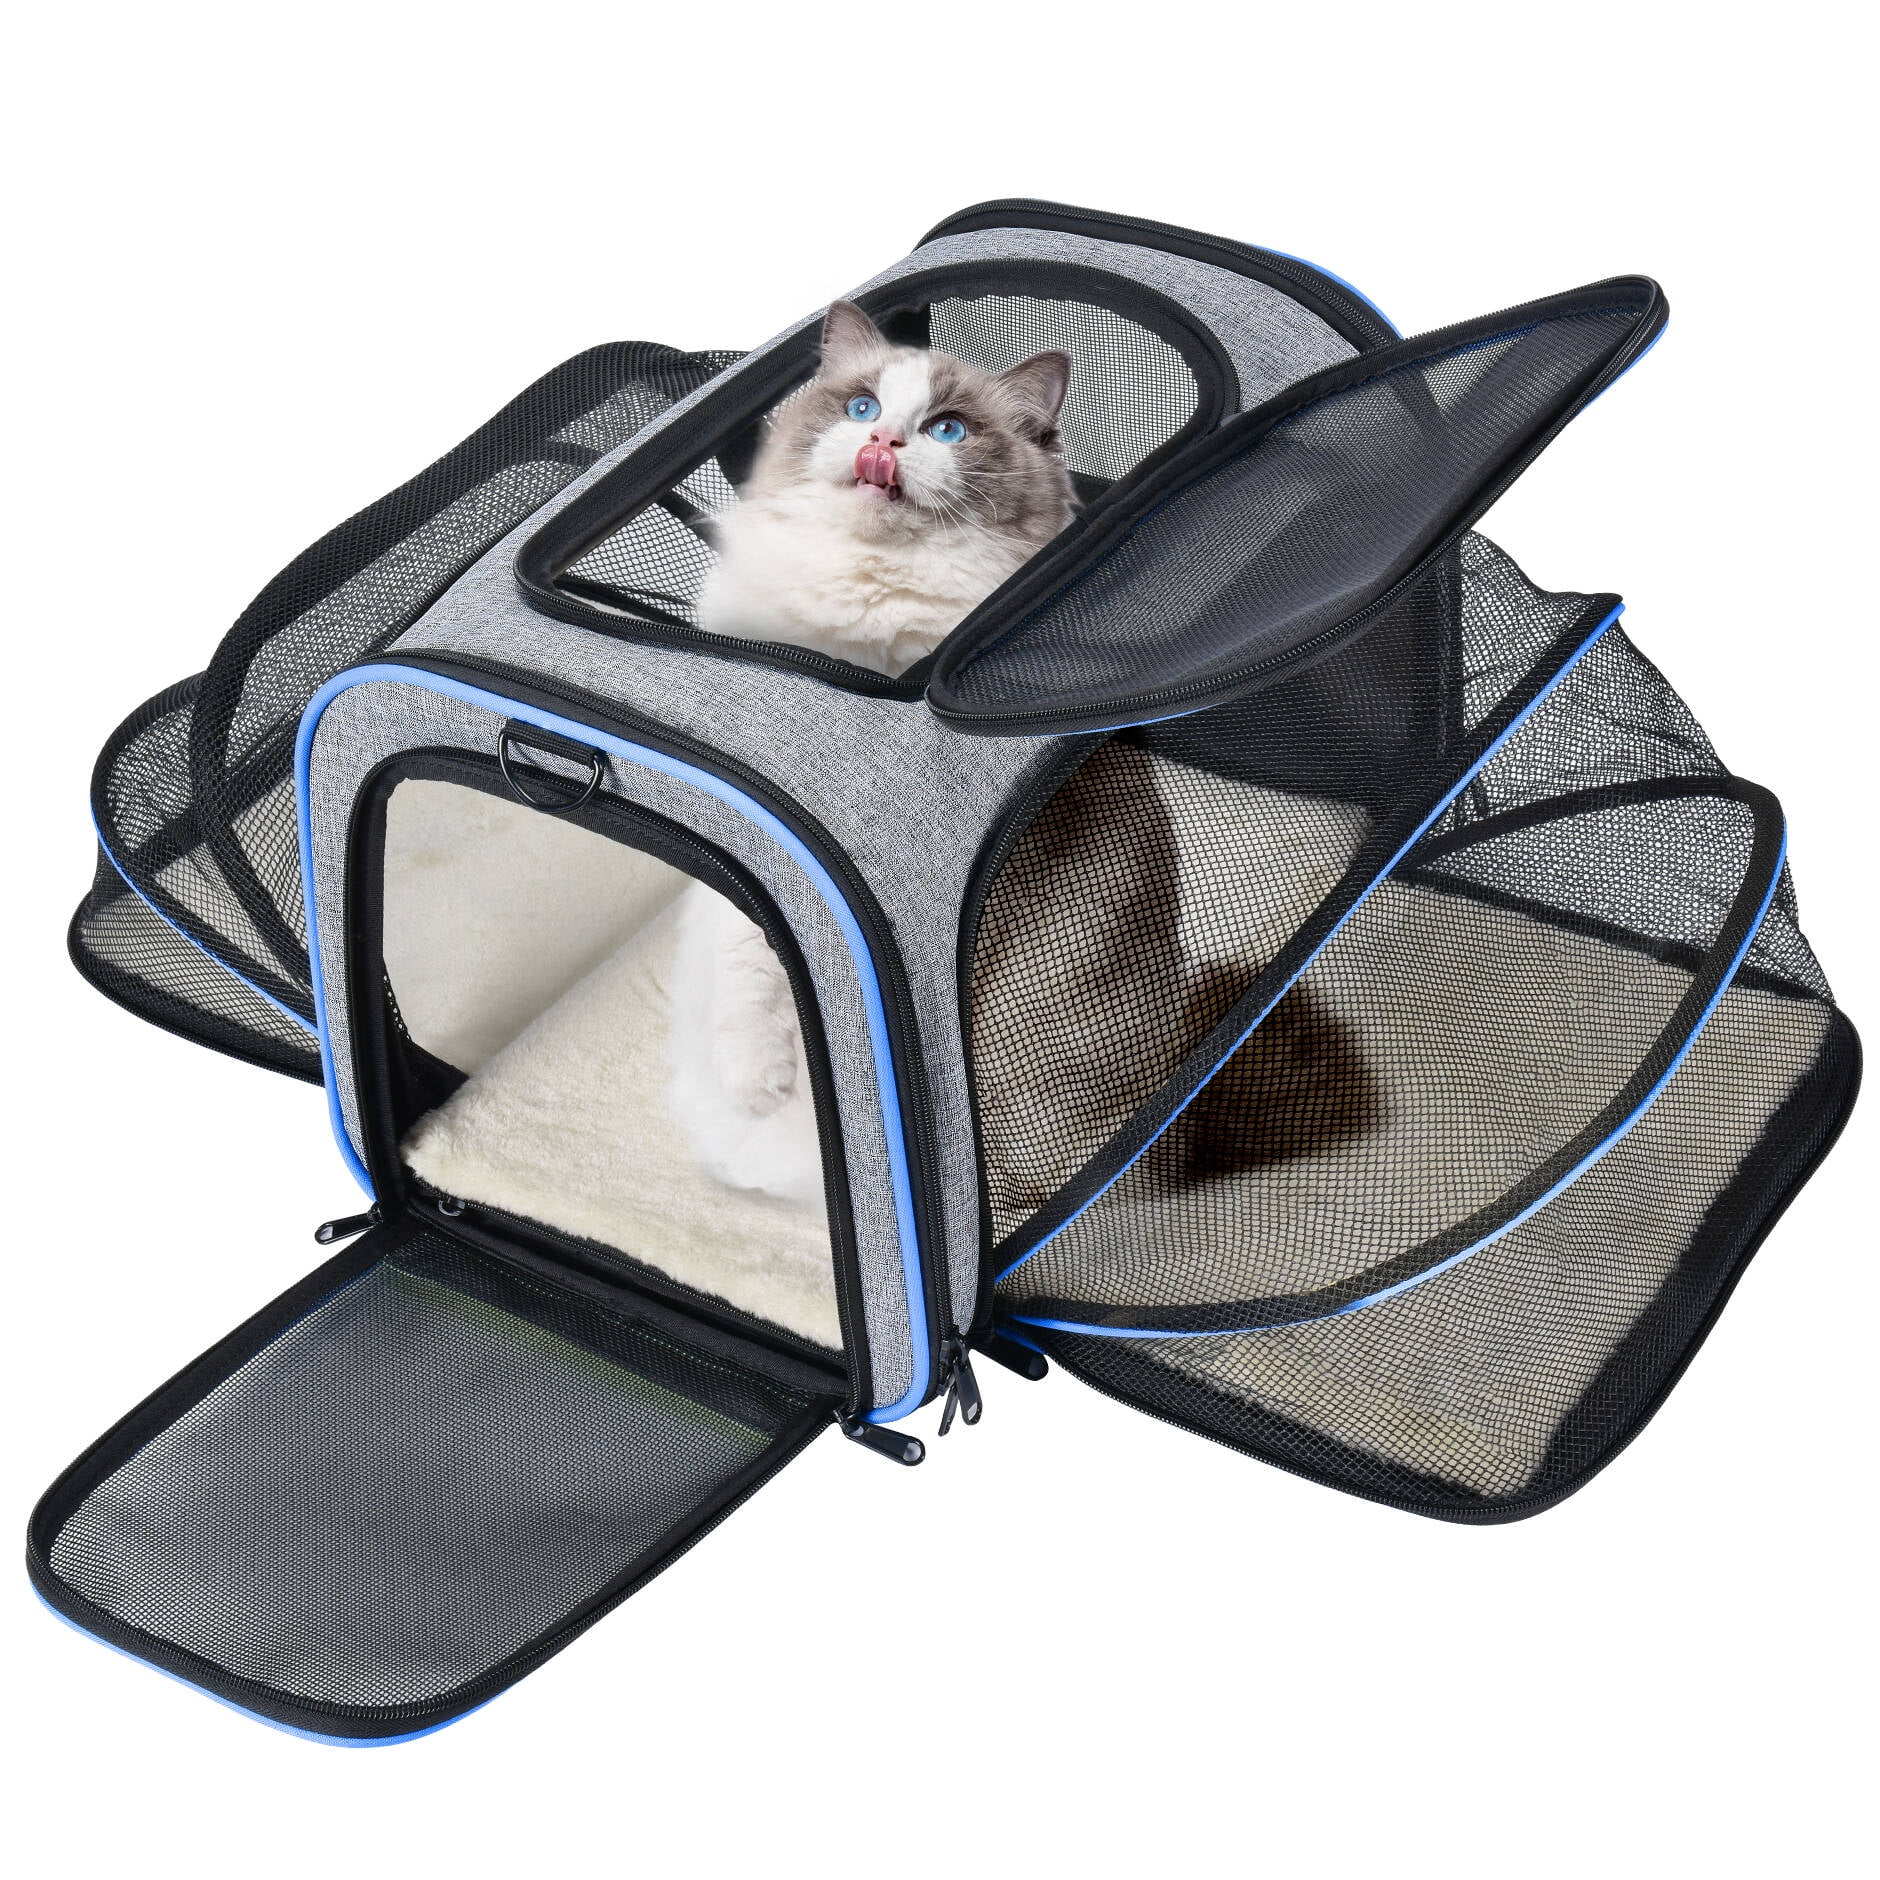 Dog Carrier, Pet Carrier, Cat Carrier, Expandable Foldable Airline Approved  Leather Pet Travel Portable Bag Carrier for Cat and Small Dog -  Hong  Kong